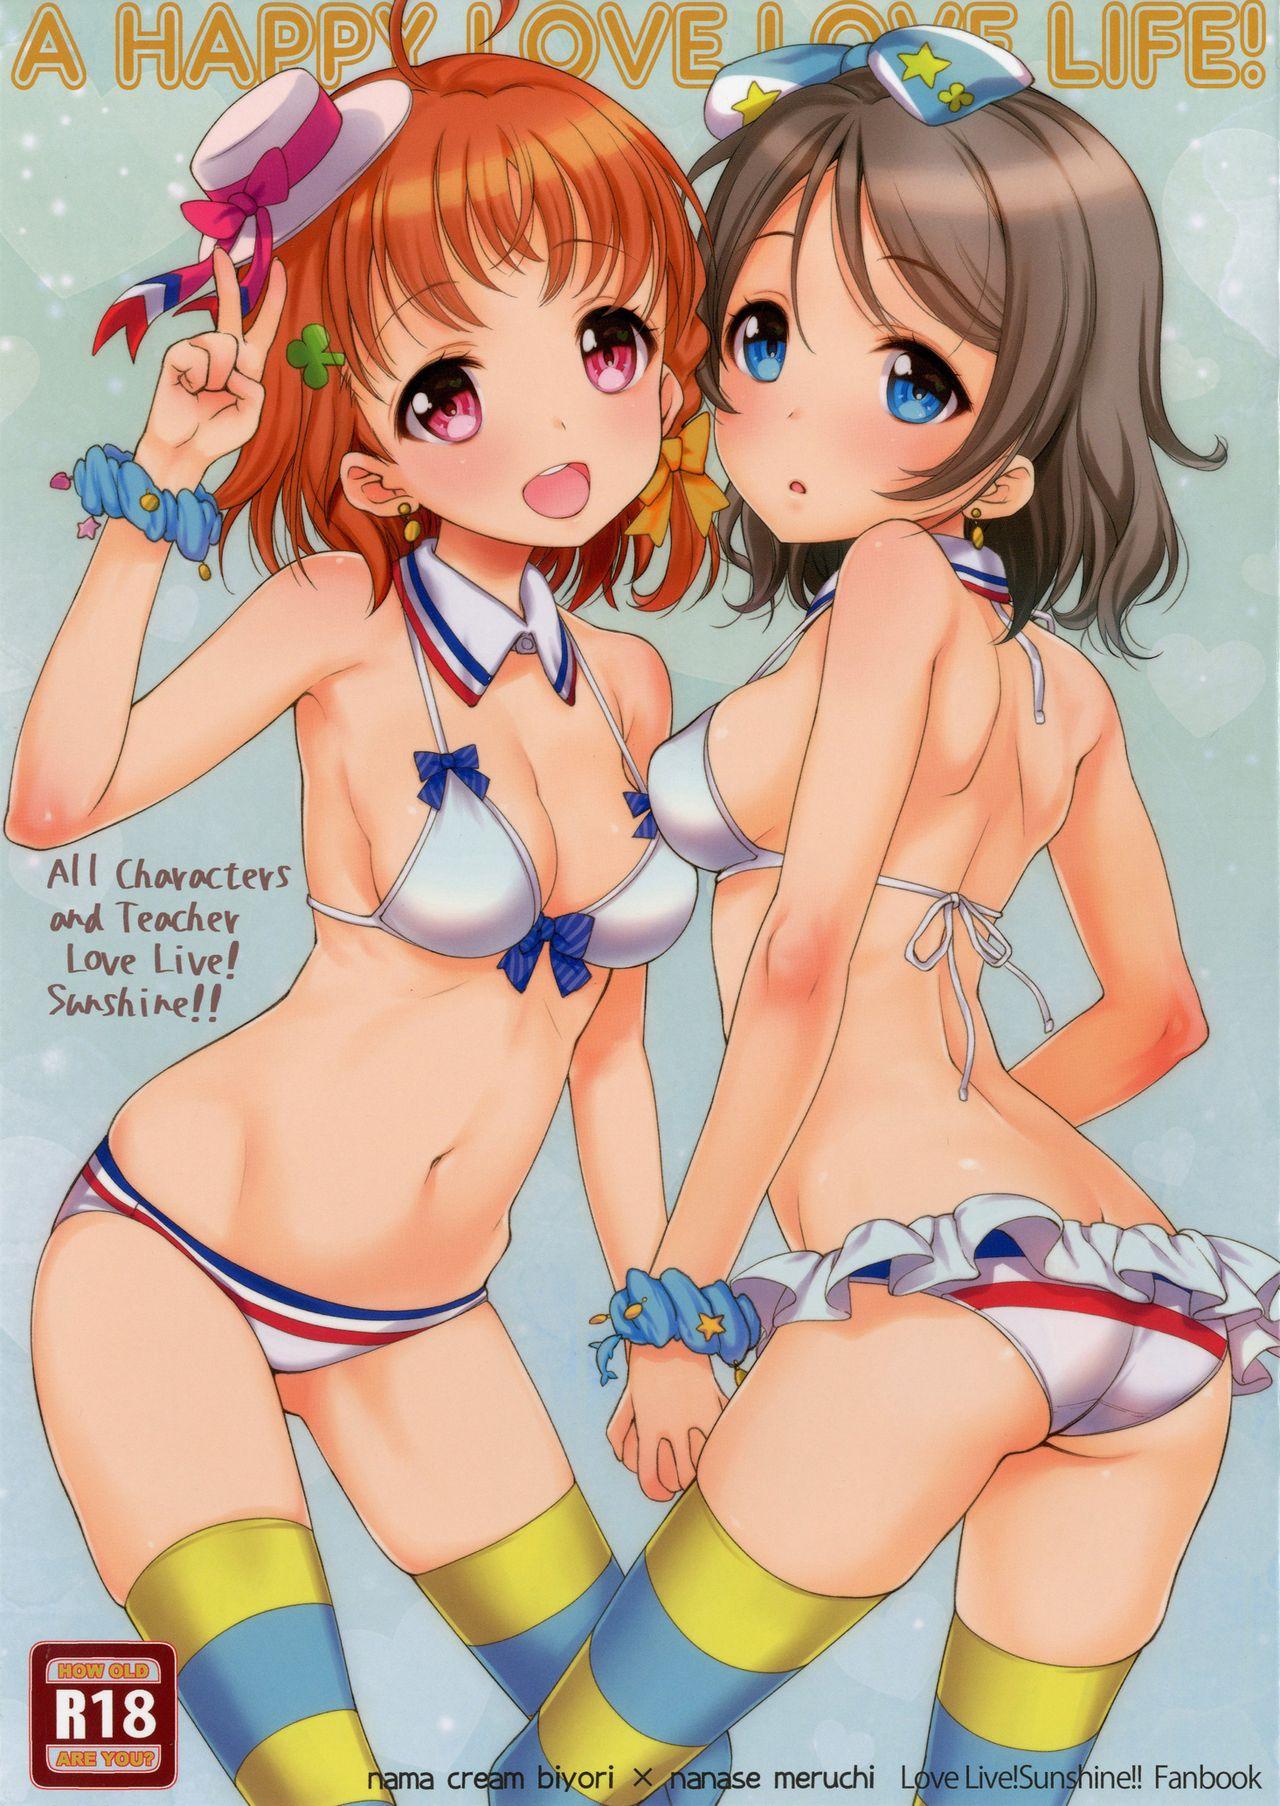 Brasil A HAPPY LOVE LOVE LIFE! - Love live sunshine Muscular - Picture 1